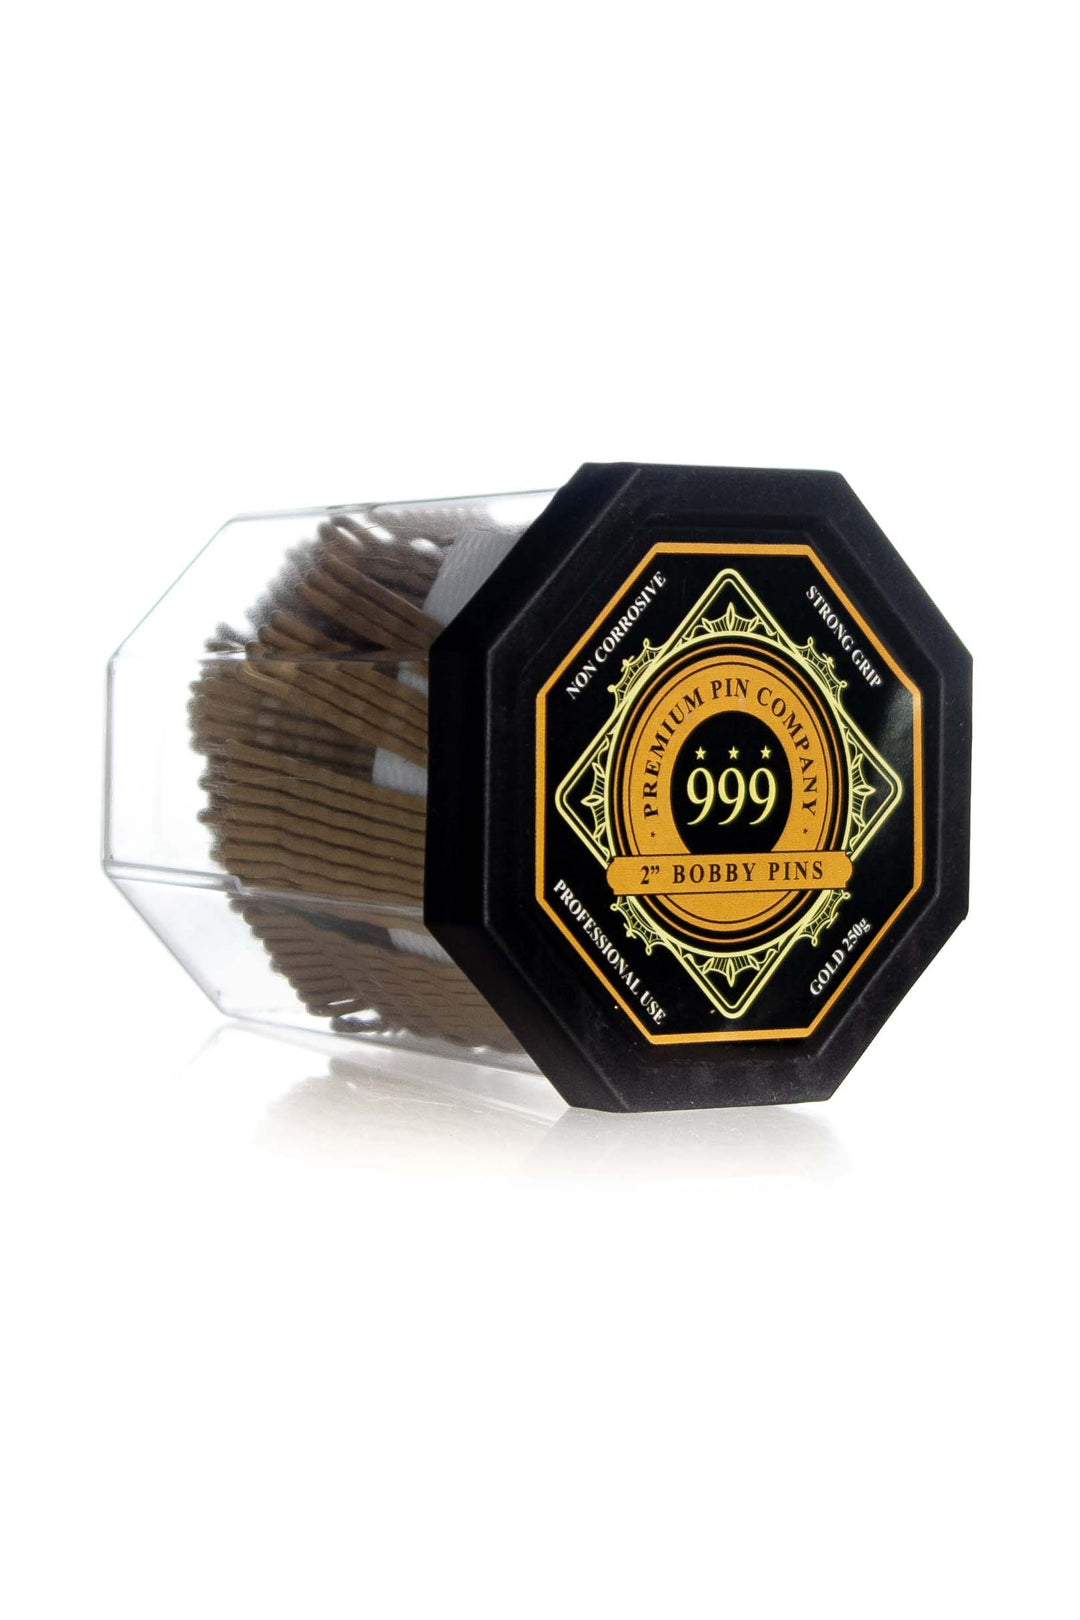 DATELINE PROFESSIONAL 999 Bobby Pins 2''  |  250g, Various Colours